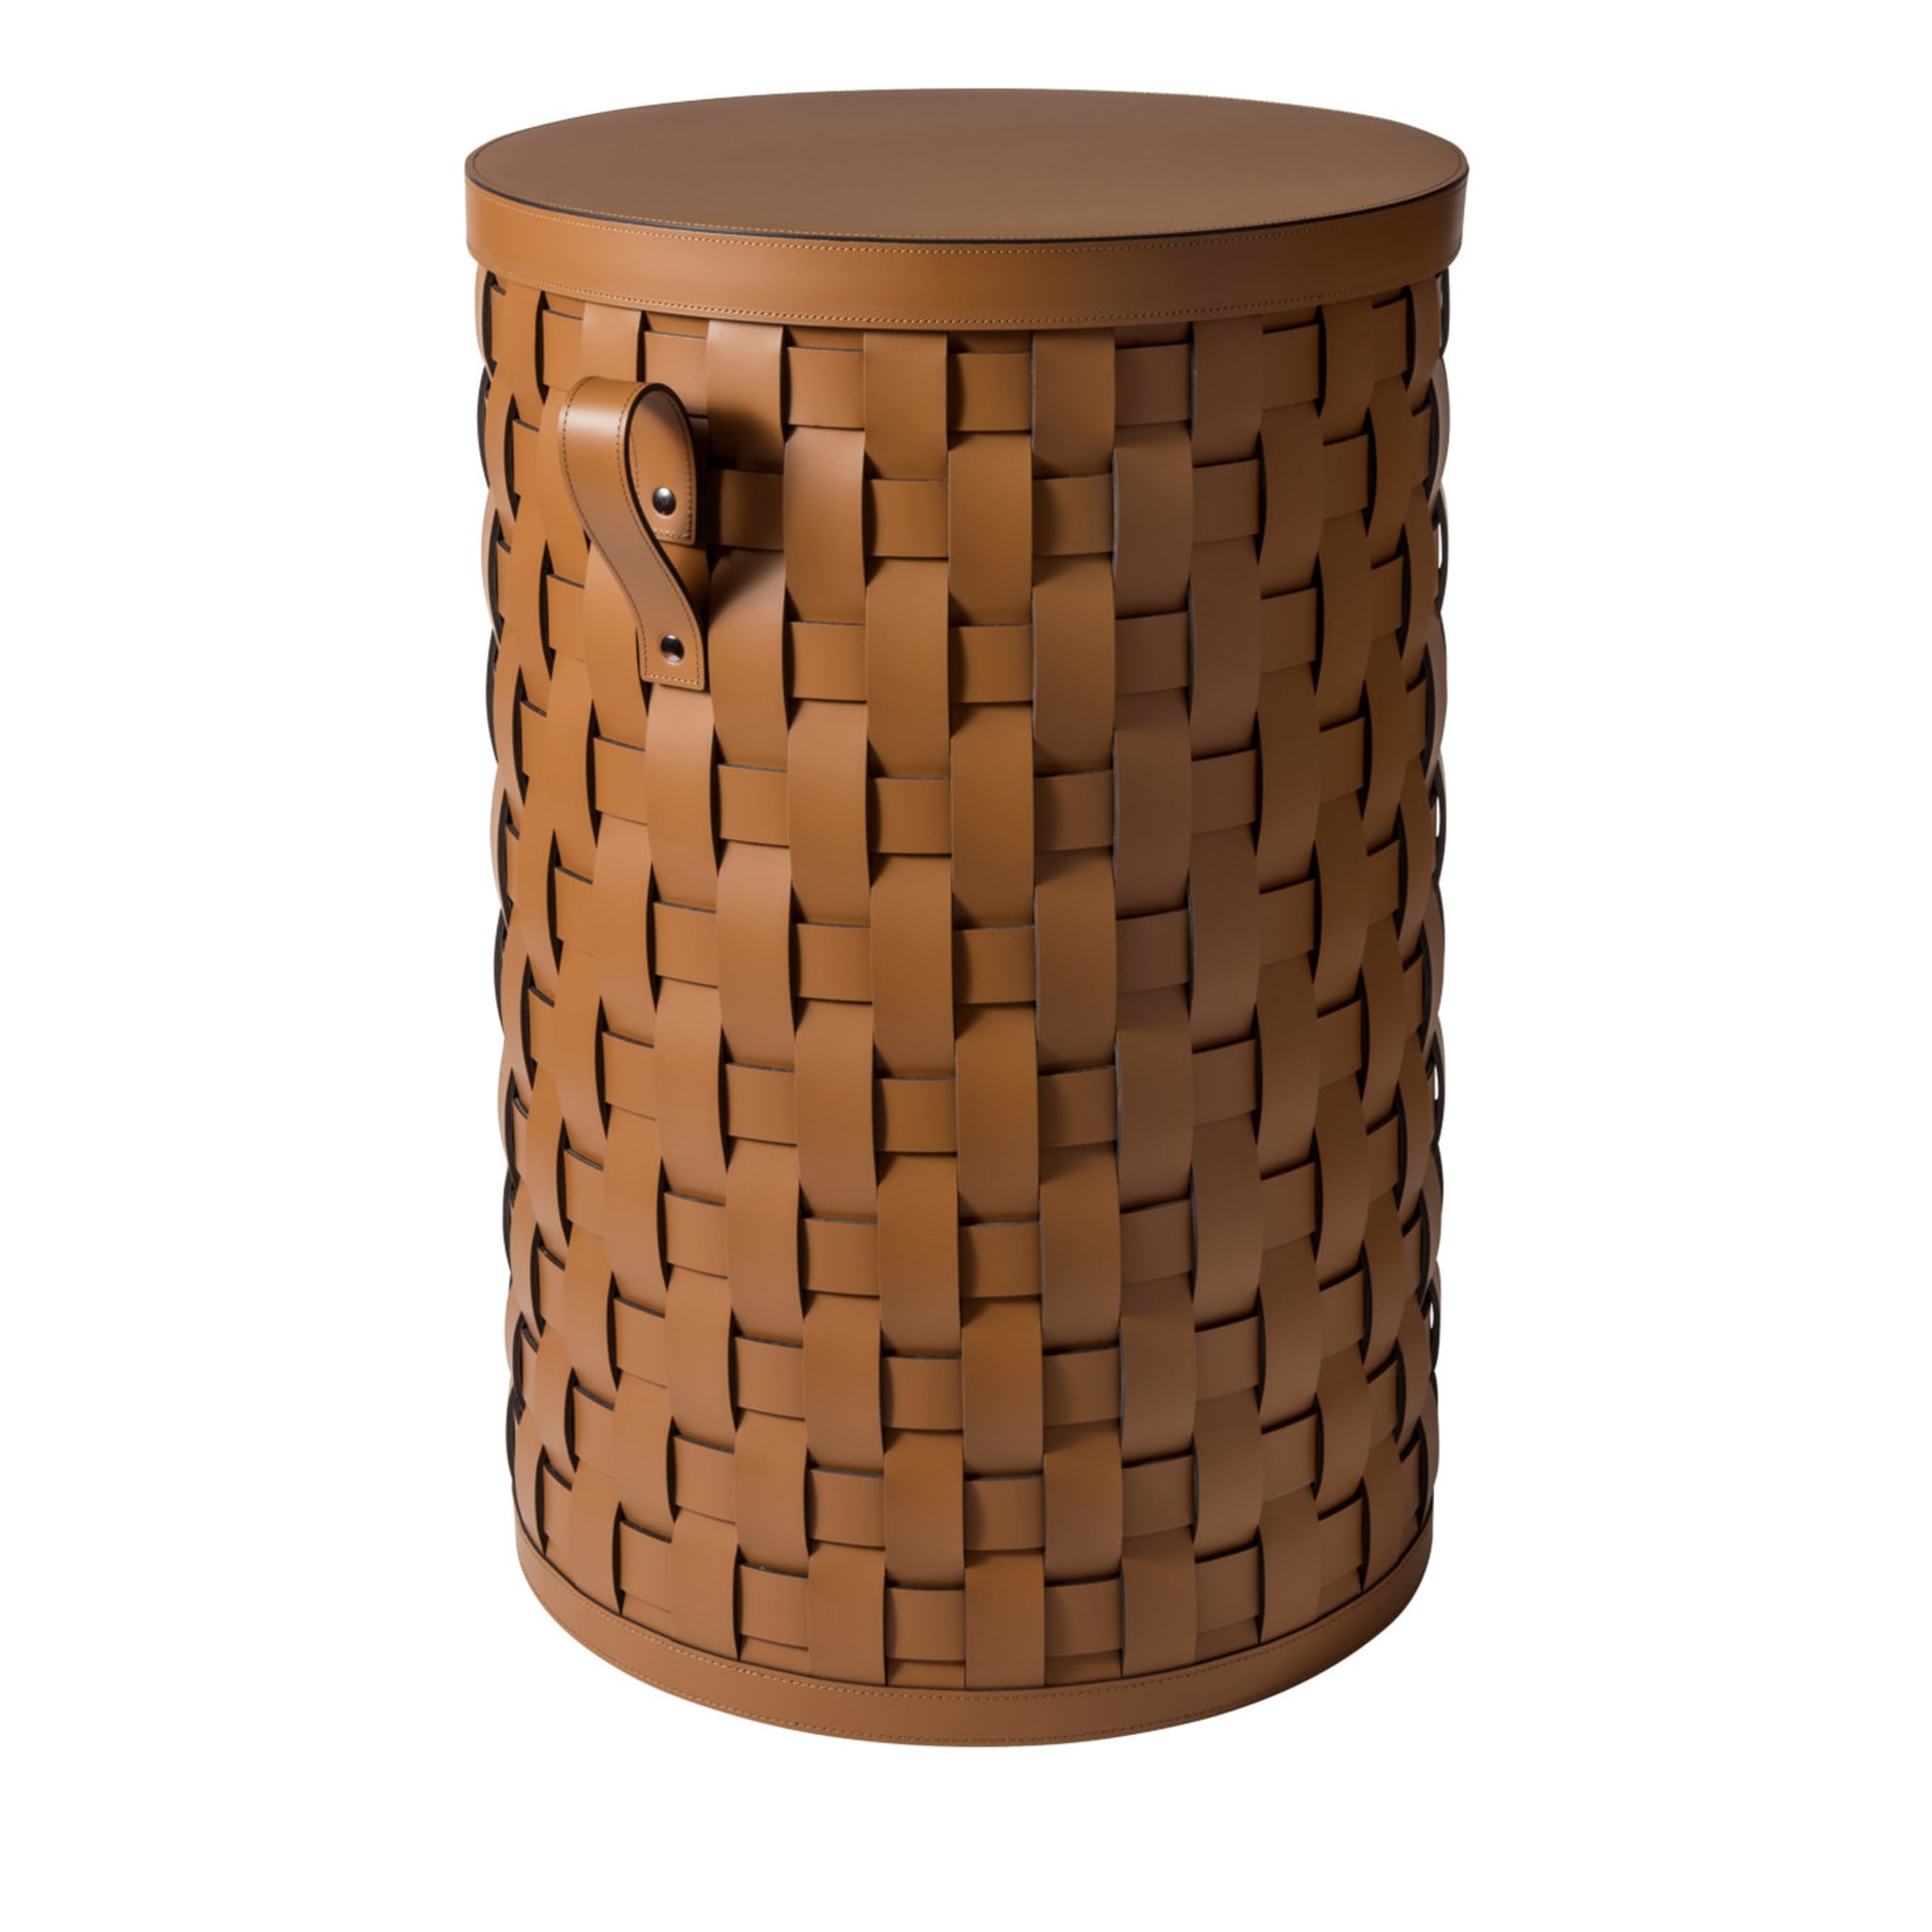 Demetra Tan Round Tall Basket with lid - Vue principale